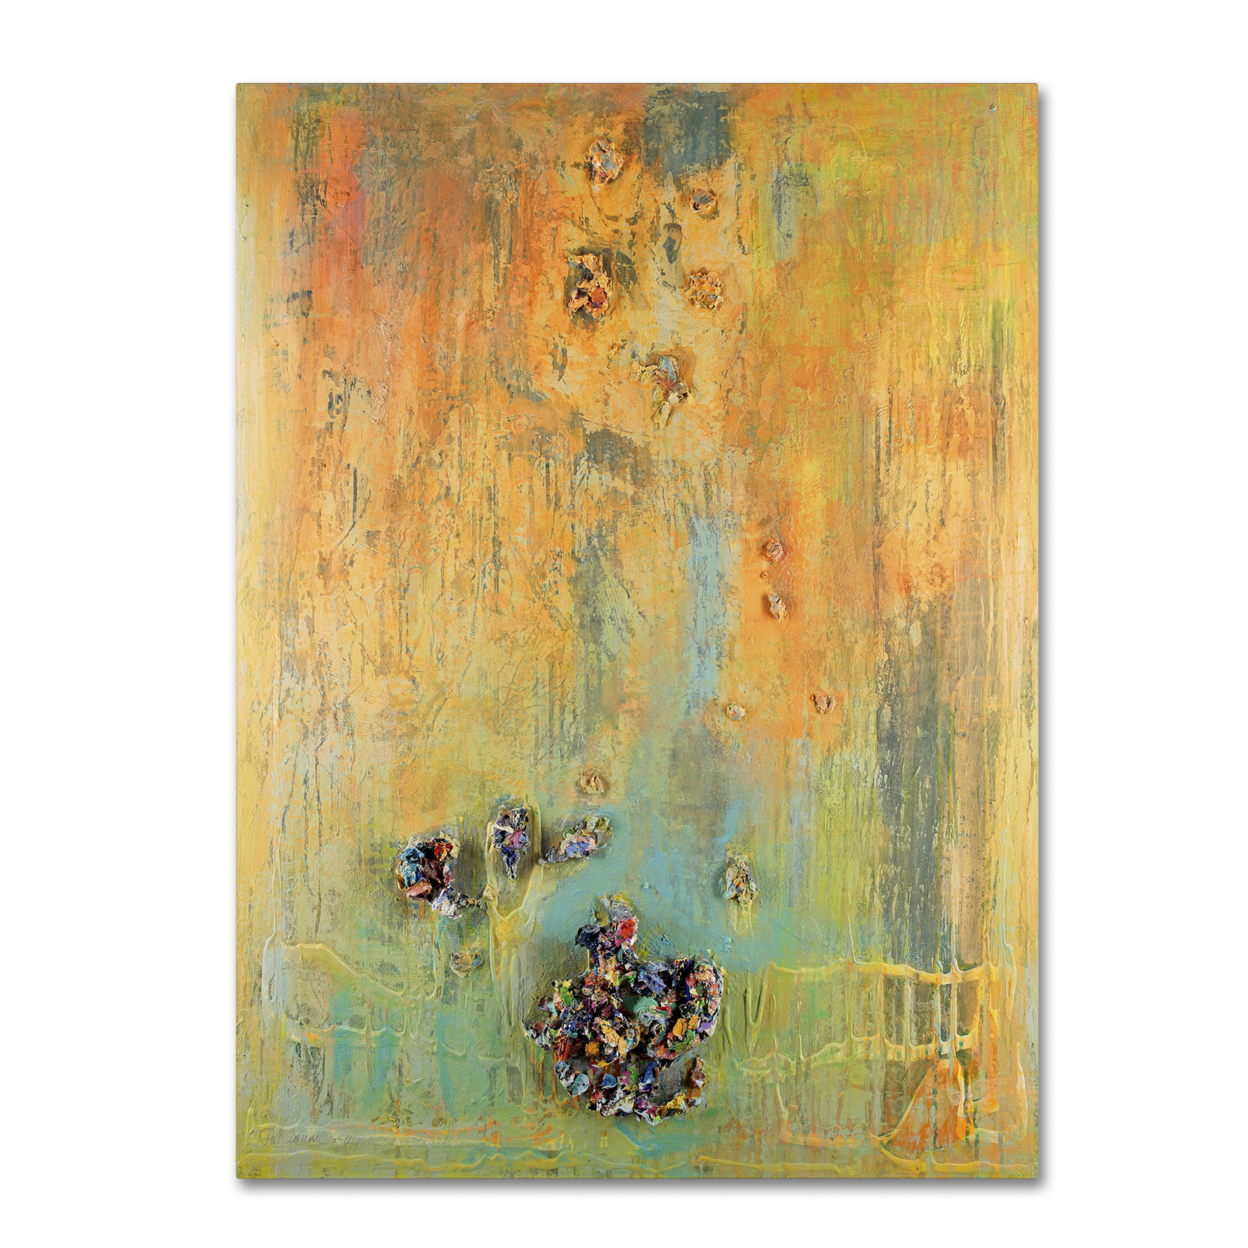 Pat Saunders-White 'Tropical Island' Canvas Wall Art 35 X 47 Inches